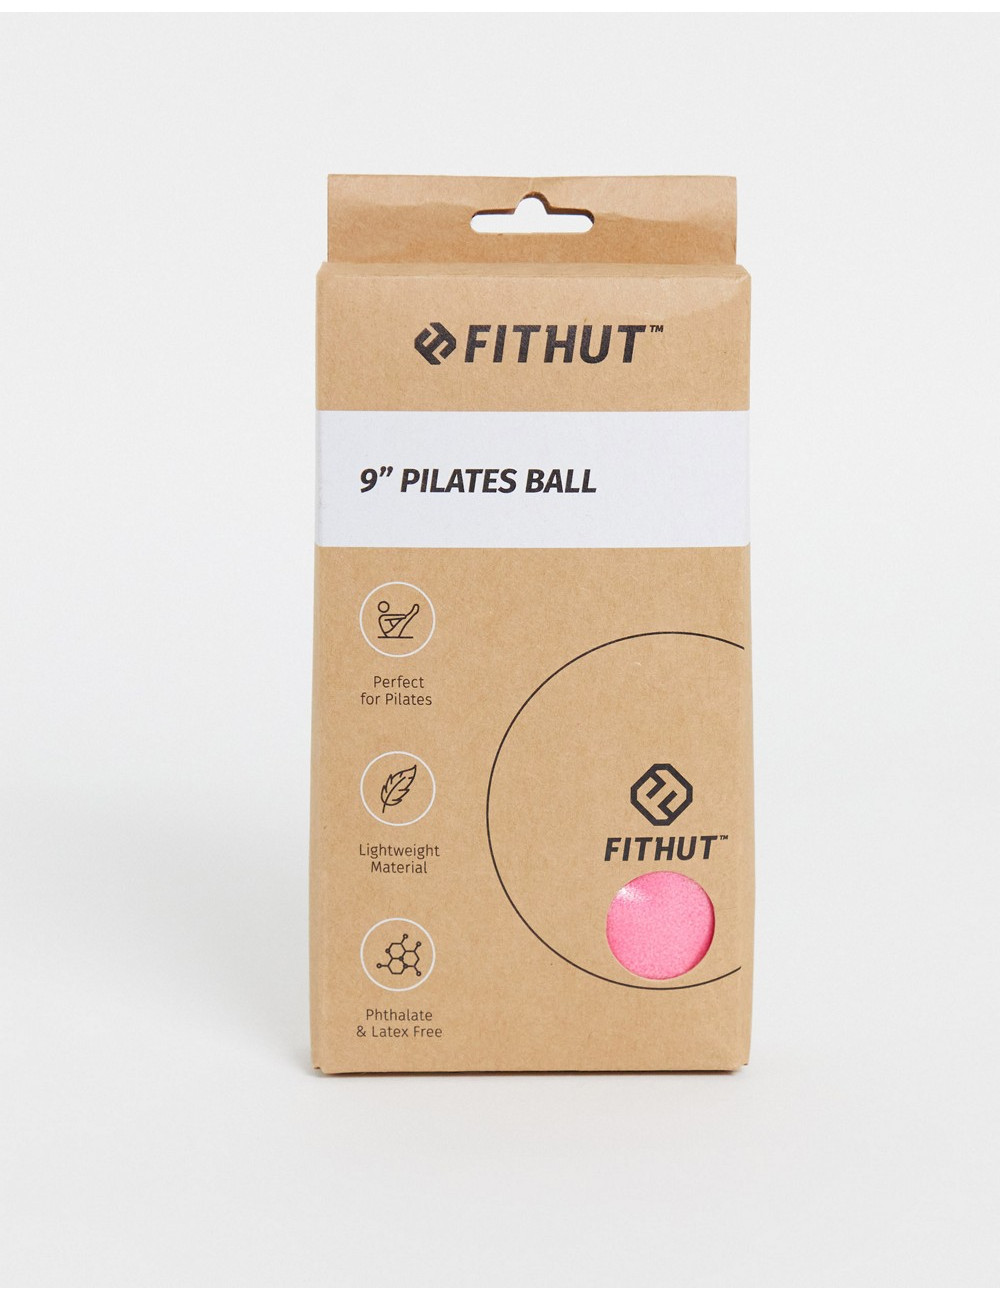 FitHut pilates ball in pink